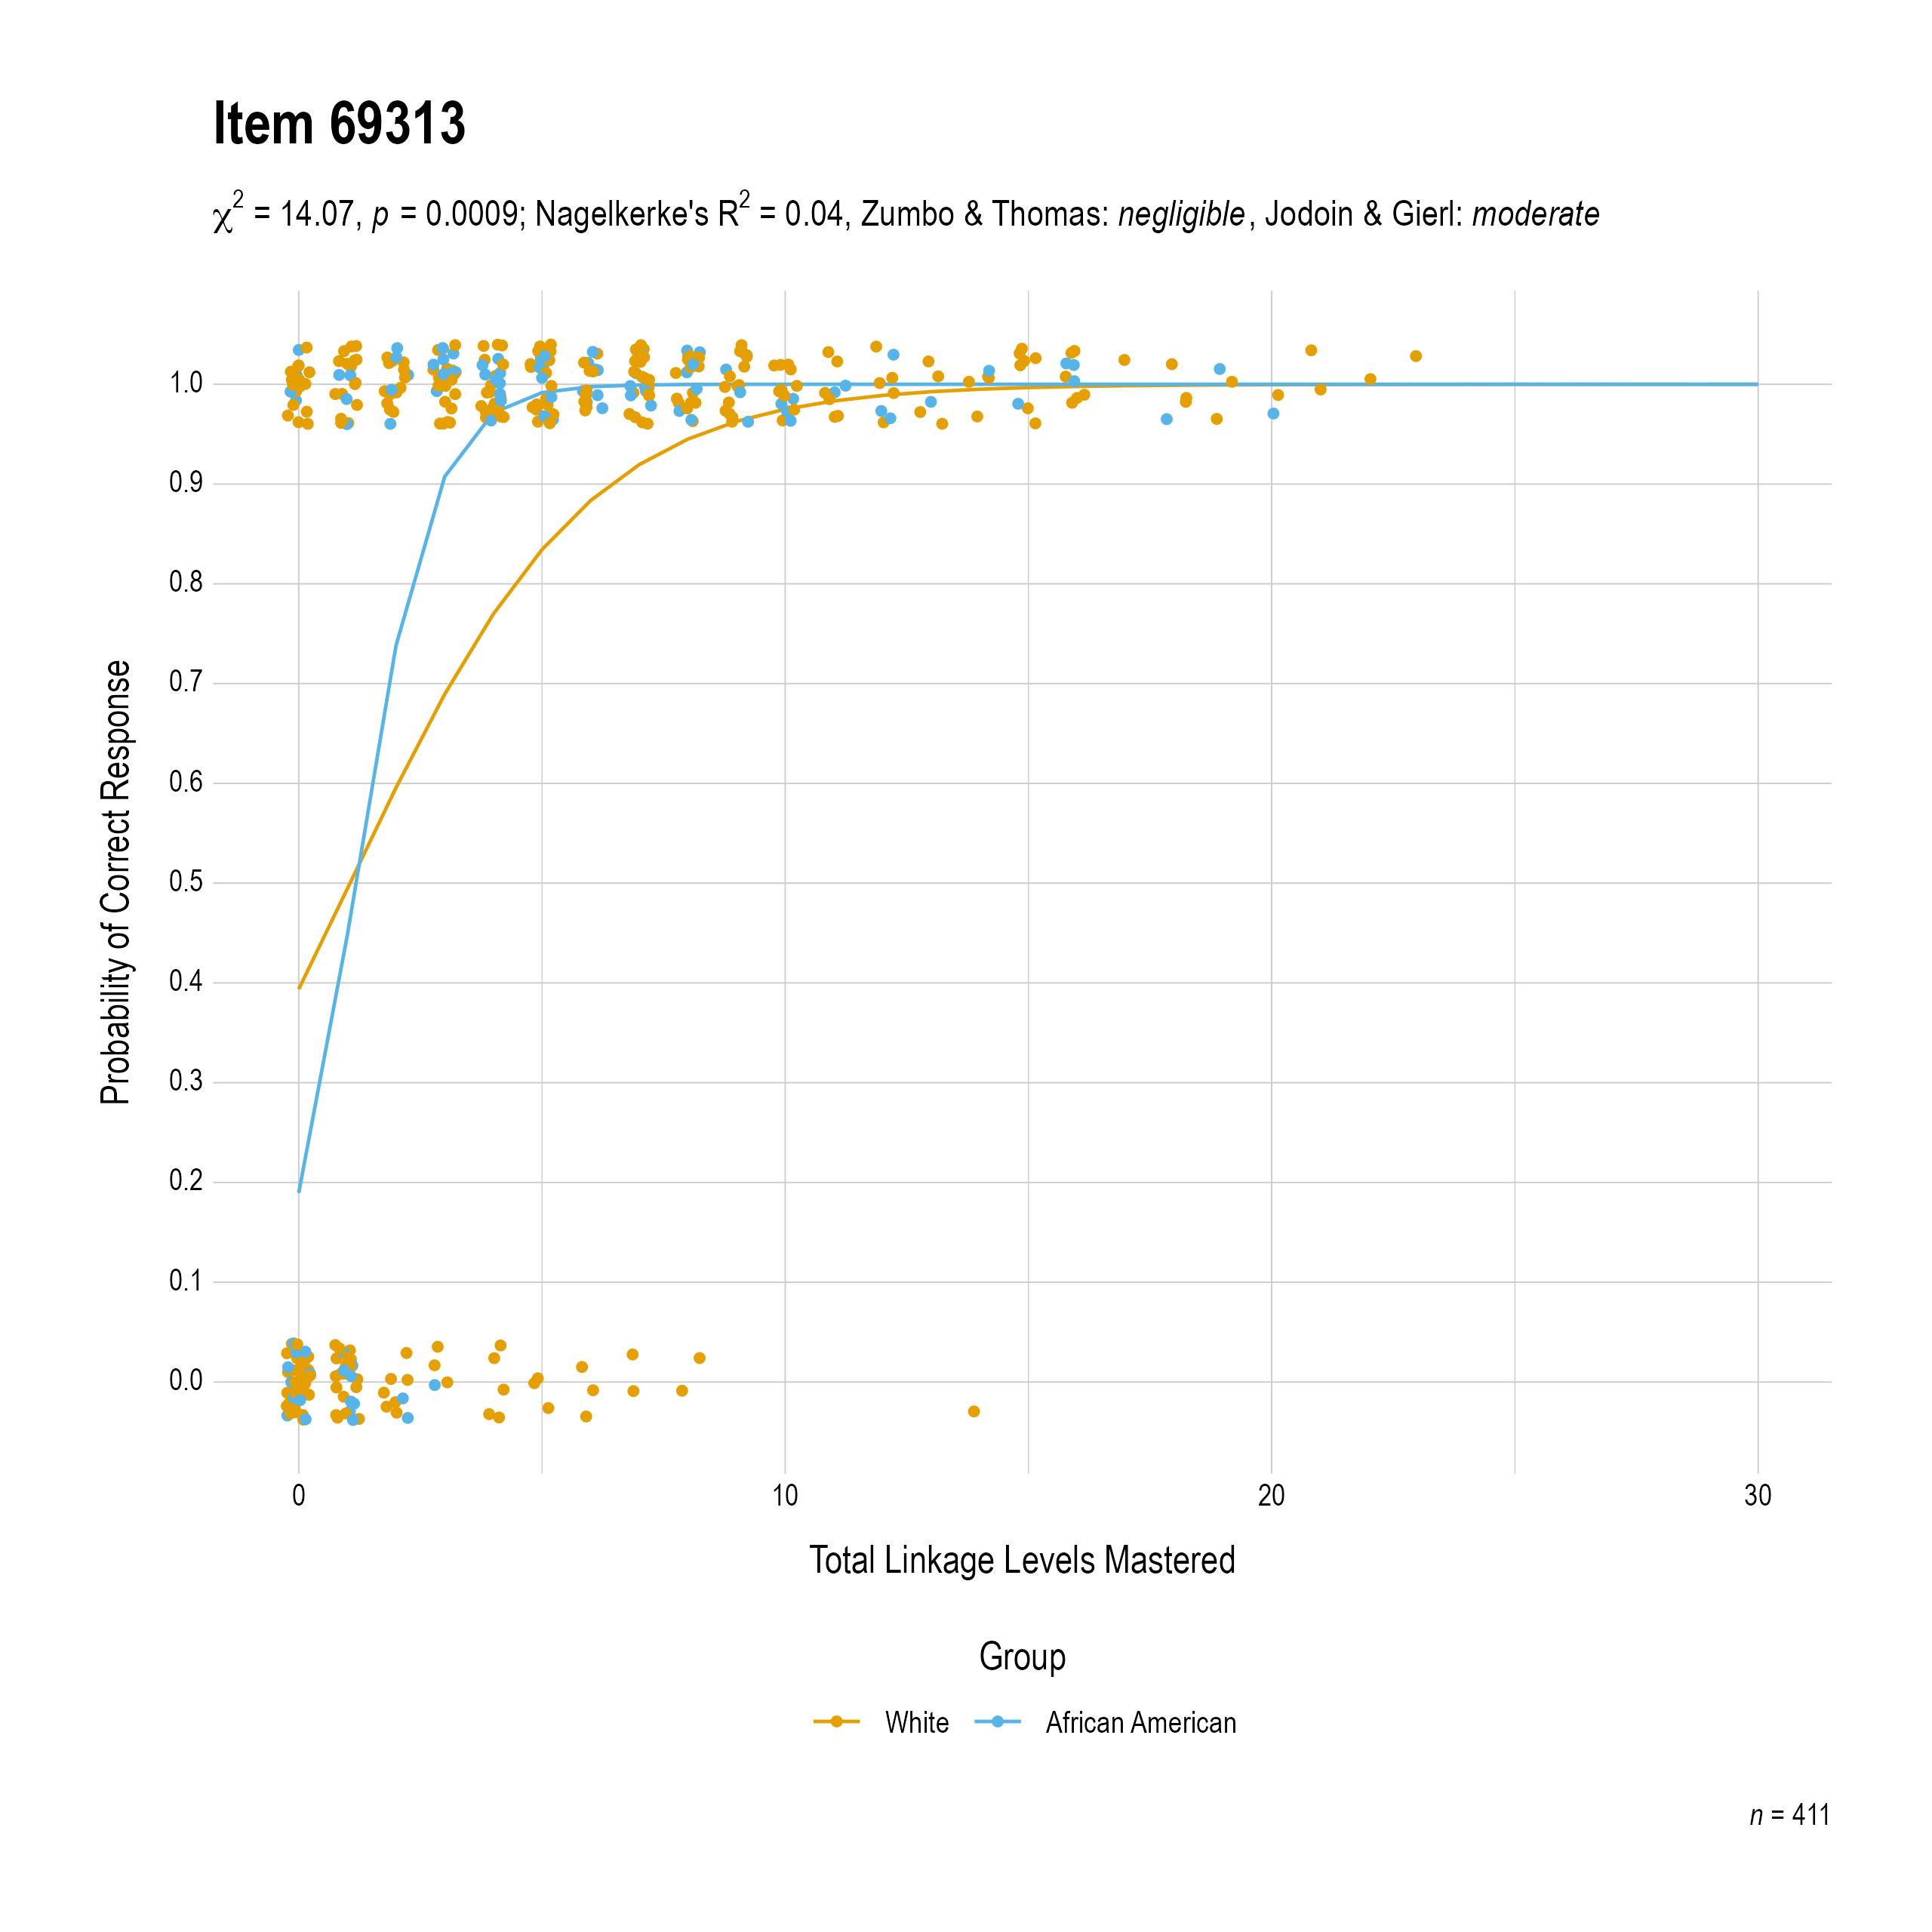 The plot of the combined race differential item function evidence for Mathematics item 69313. The figure contains points shaded by group. The figure also contains a logistic regression curve for each group. The total linkage levels mastered in is on the x-axis, and the probability of a correct response is on the y-axis.